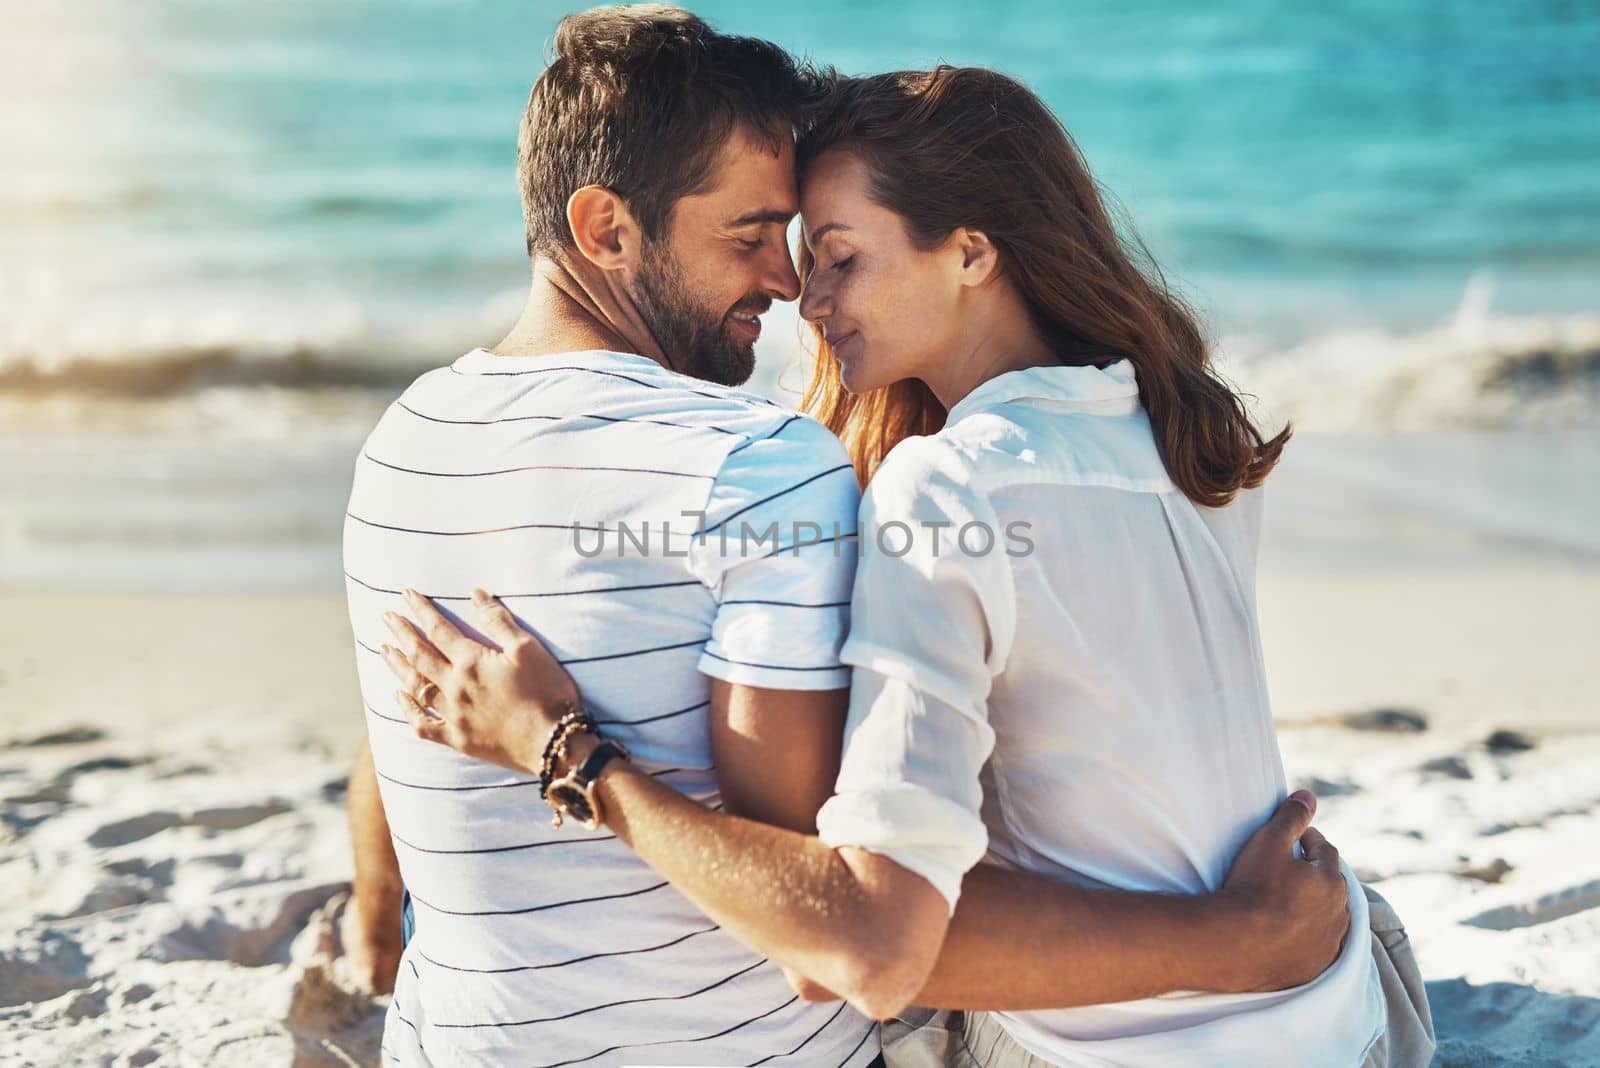 Summer romance doesnt get any better than this. Rearview shot of a young couple kissing on a summers day at the beach